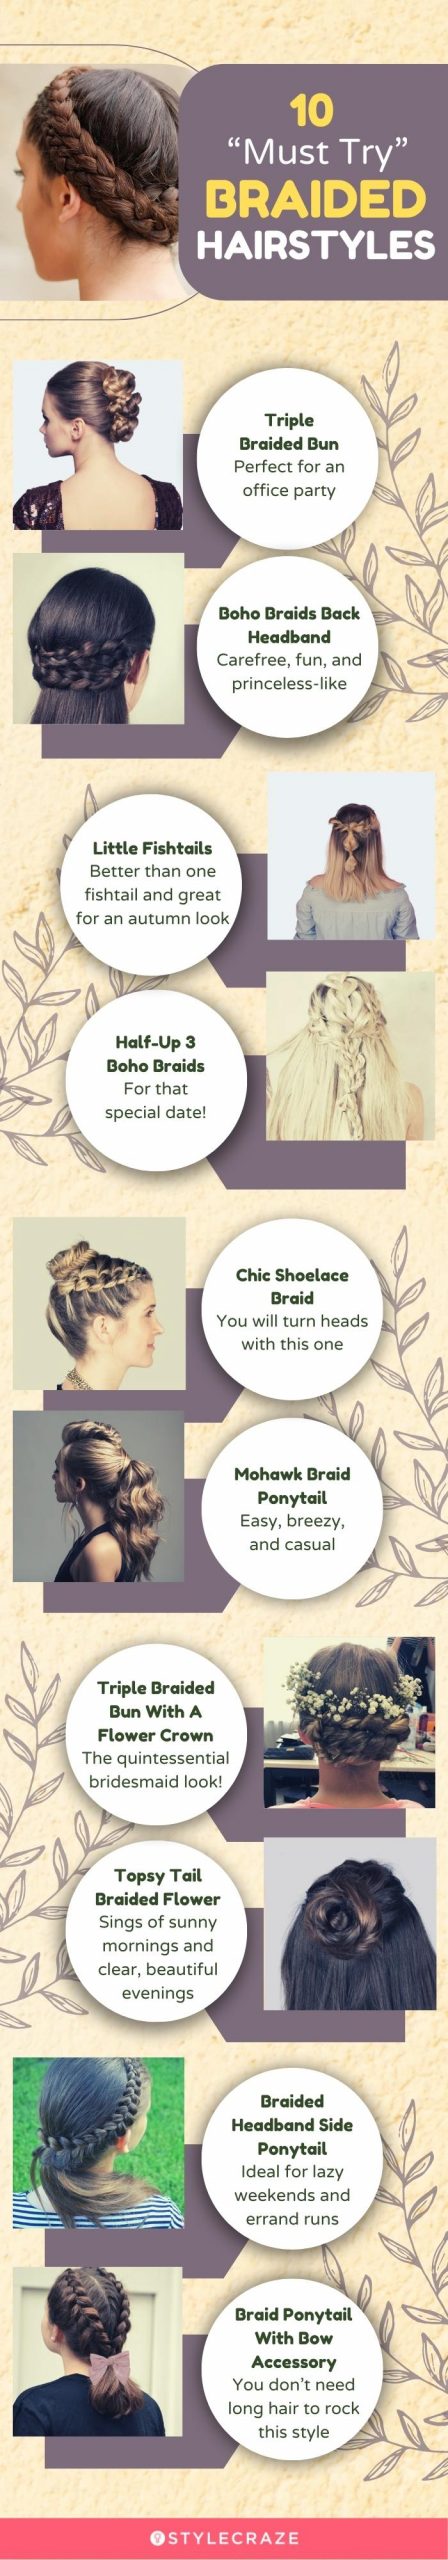 10 must try braided hairstyles [infographic]